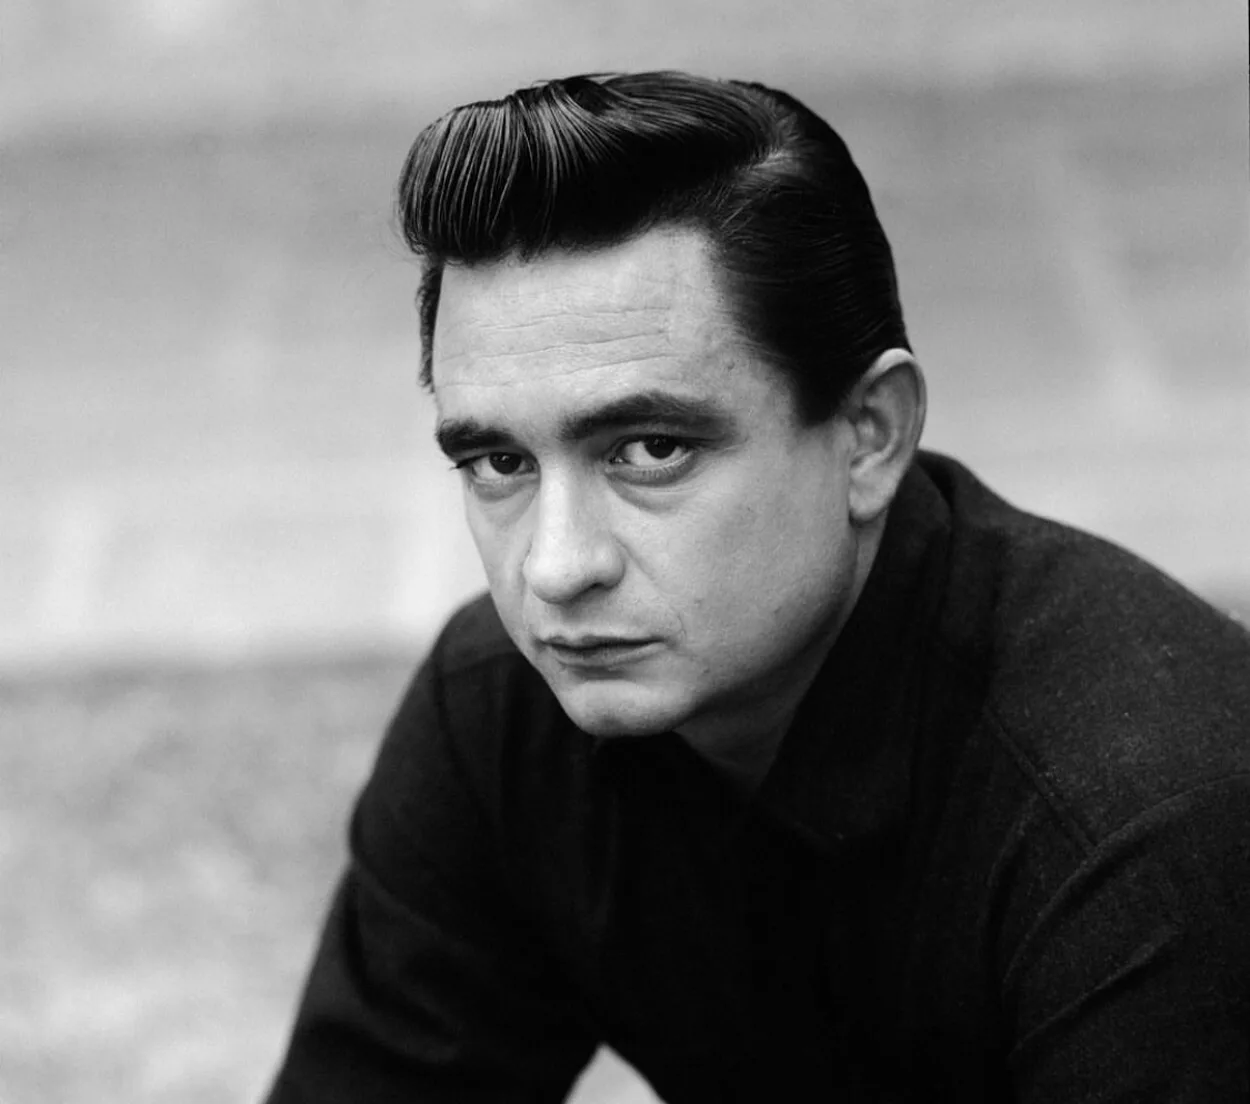 Johnny Cash in the black and white era